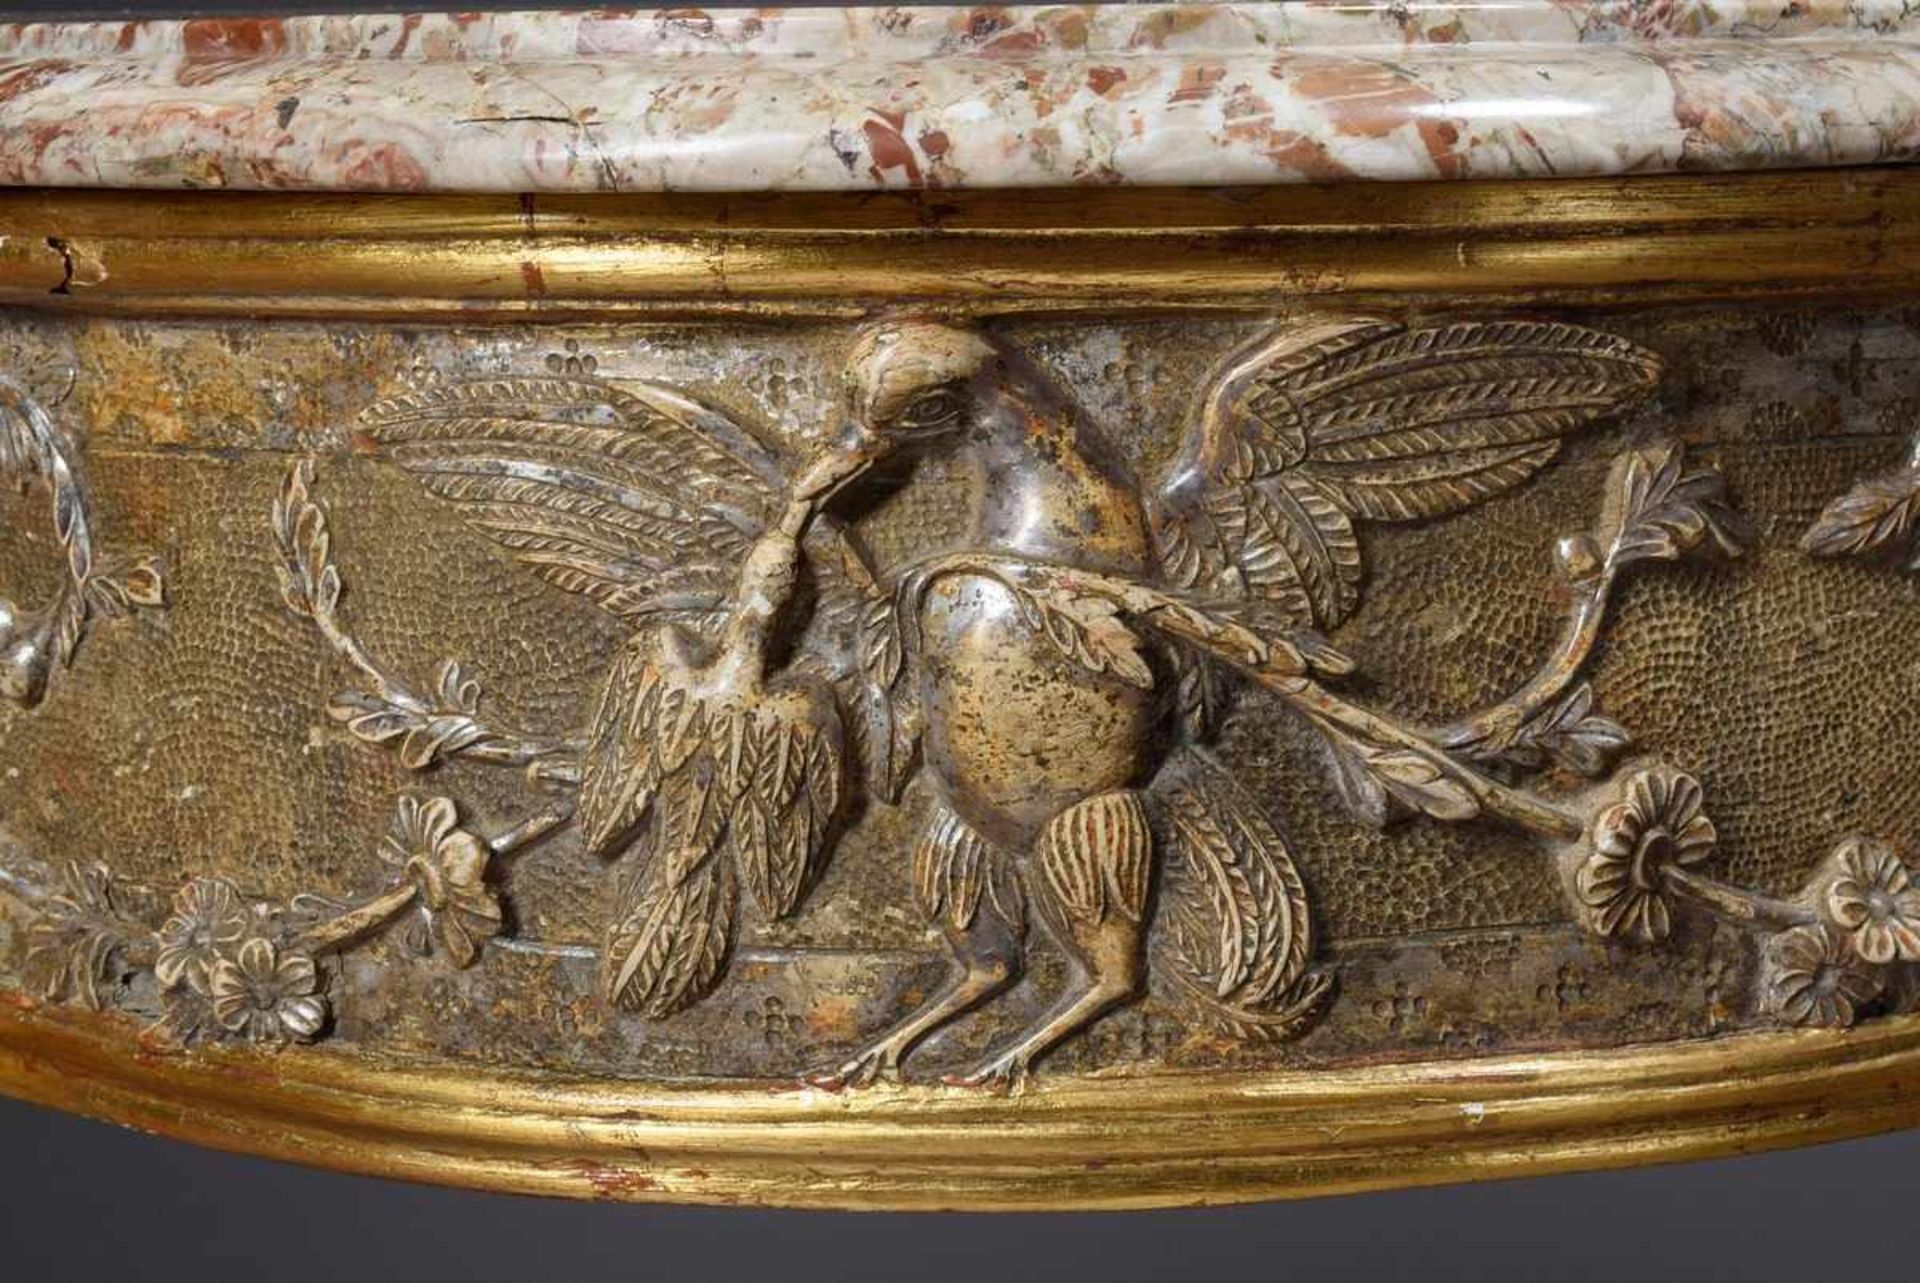 Courtly Louis XVI console on pointed legs with floral and ornamental relief carving "Birds" in the - Image 6 of 6